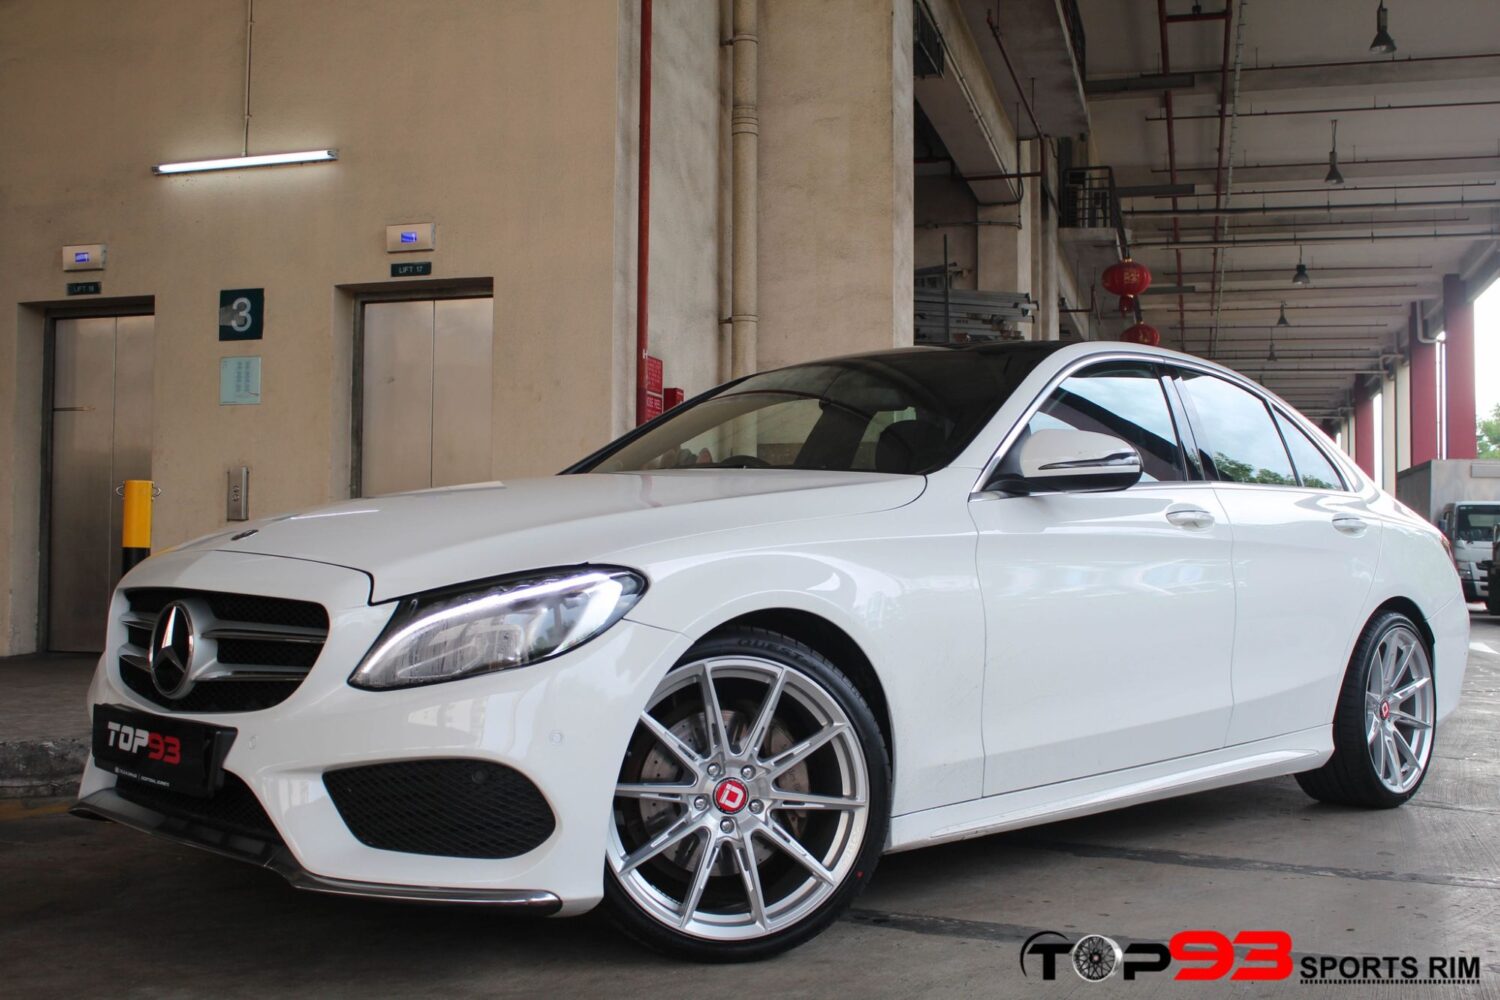 Mercedes-Benz C-Class W205 with 19×8.5 and 19×9.5-inch Klassen iD F07R